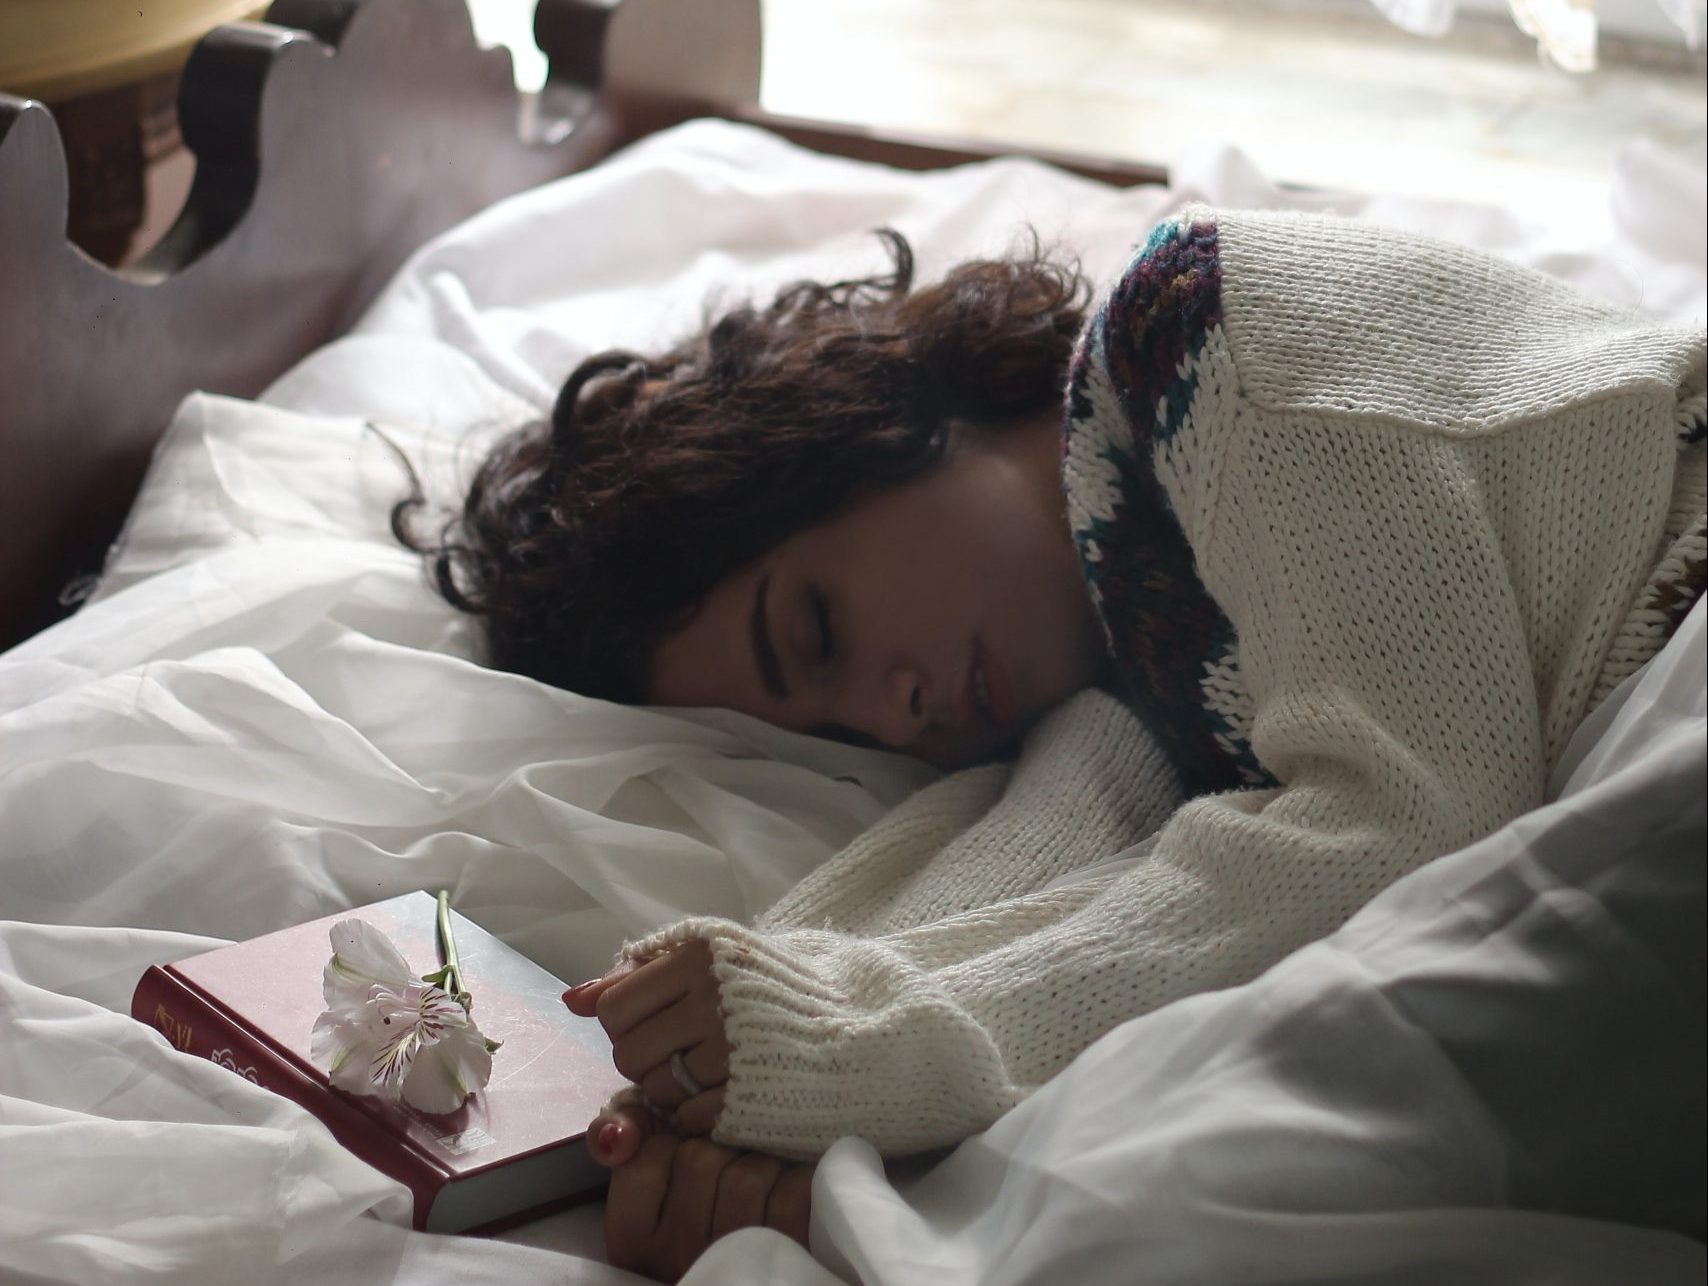 A photo of a woman sleeping for an article about relaxation during Christmas break.